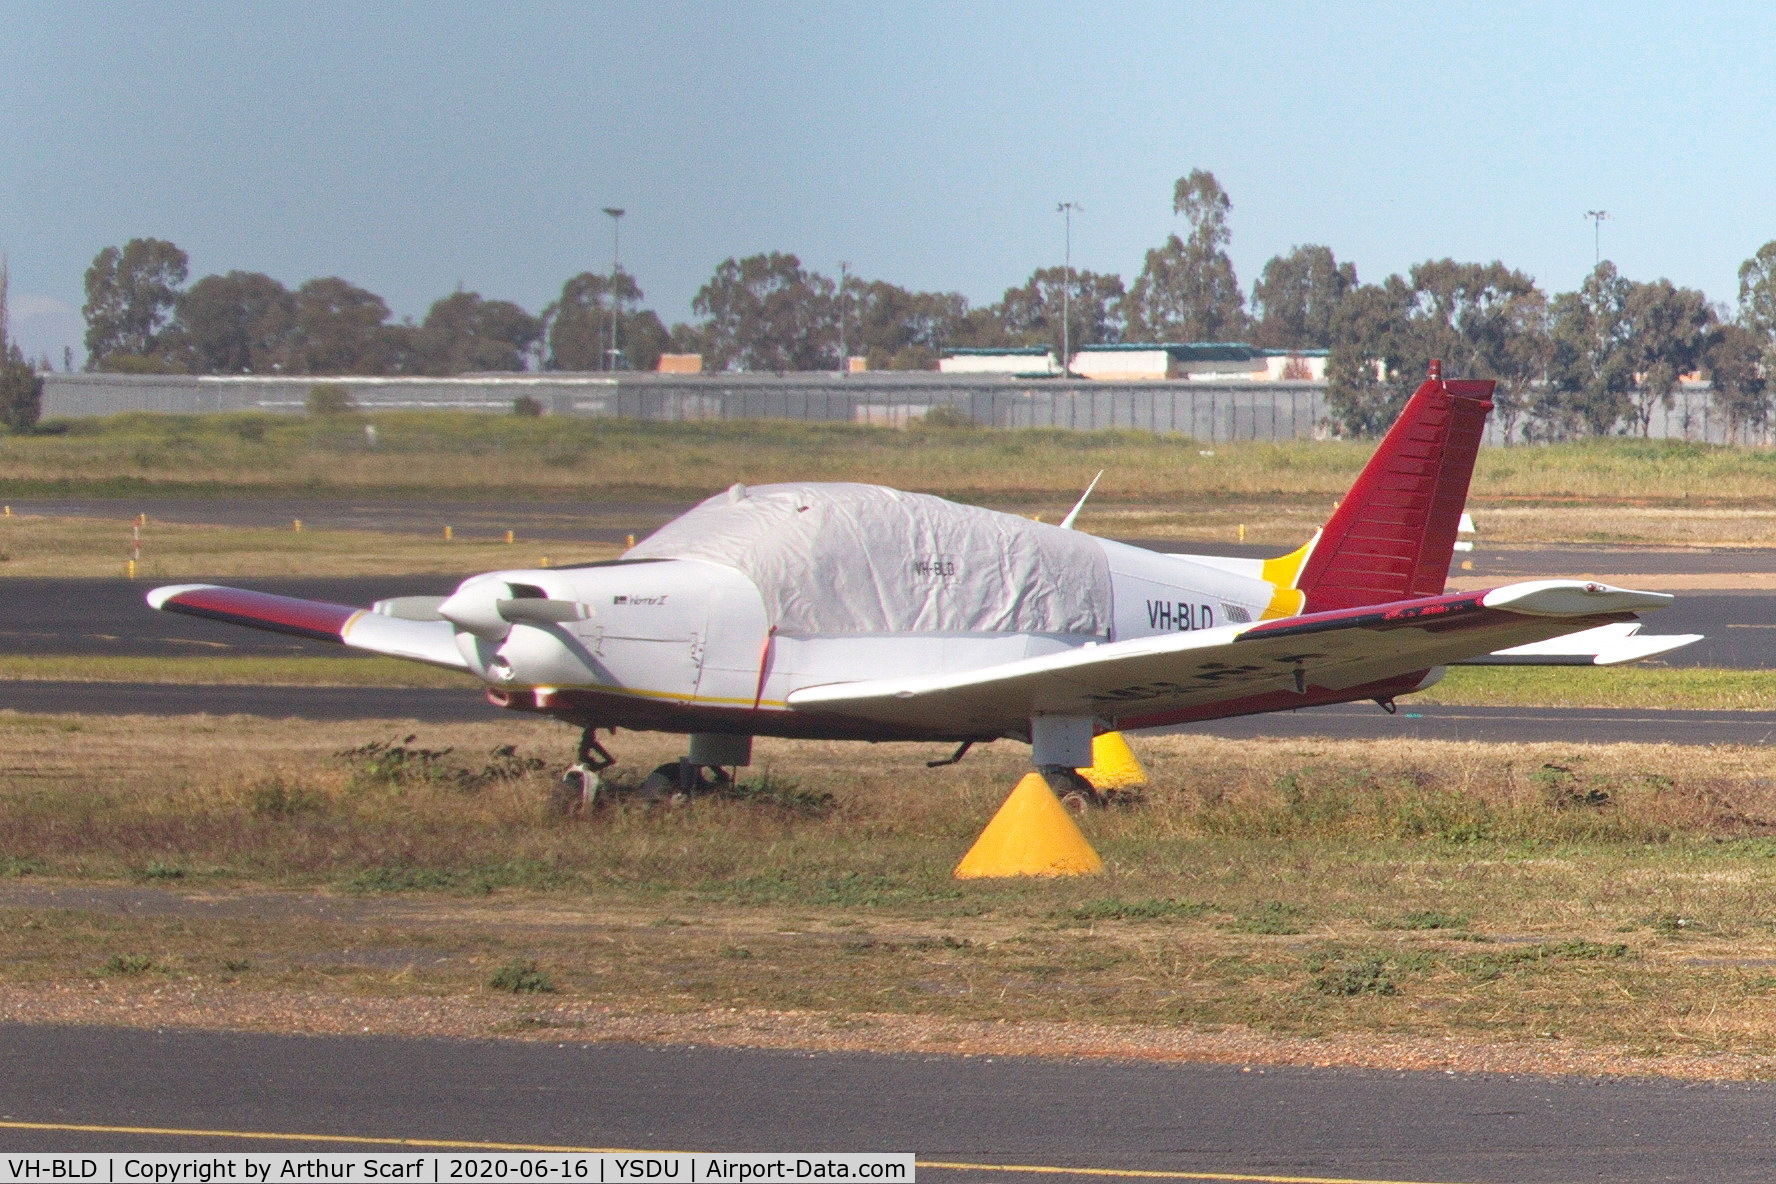 VH-BLD, 1981 Piper PA-28-161 Warrior ll C/N 28-8116136, DUBBO Airport NSW June 2020